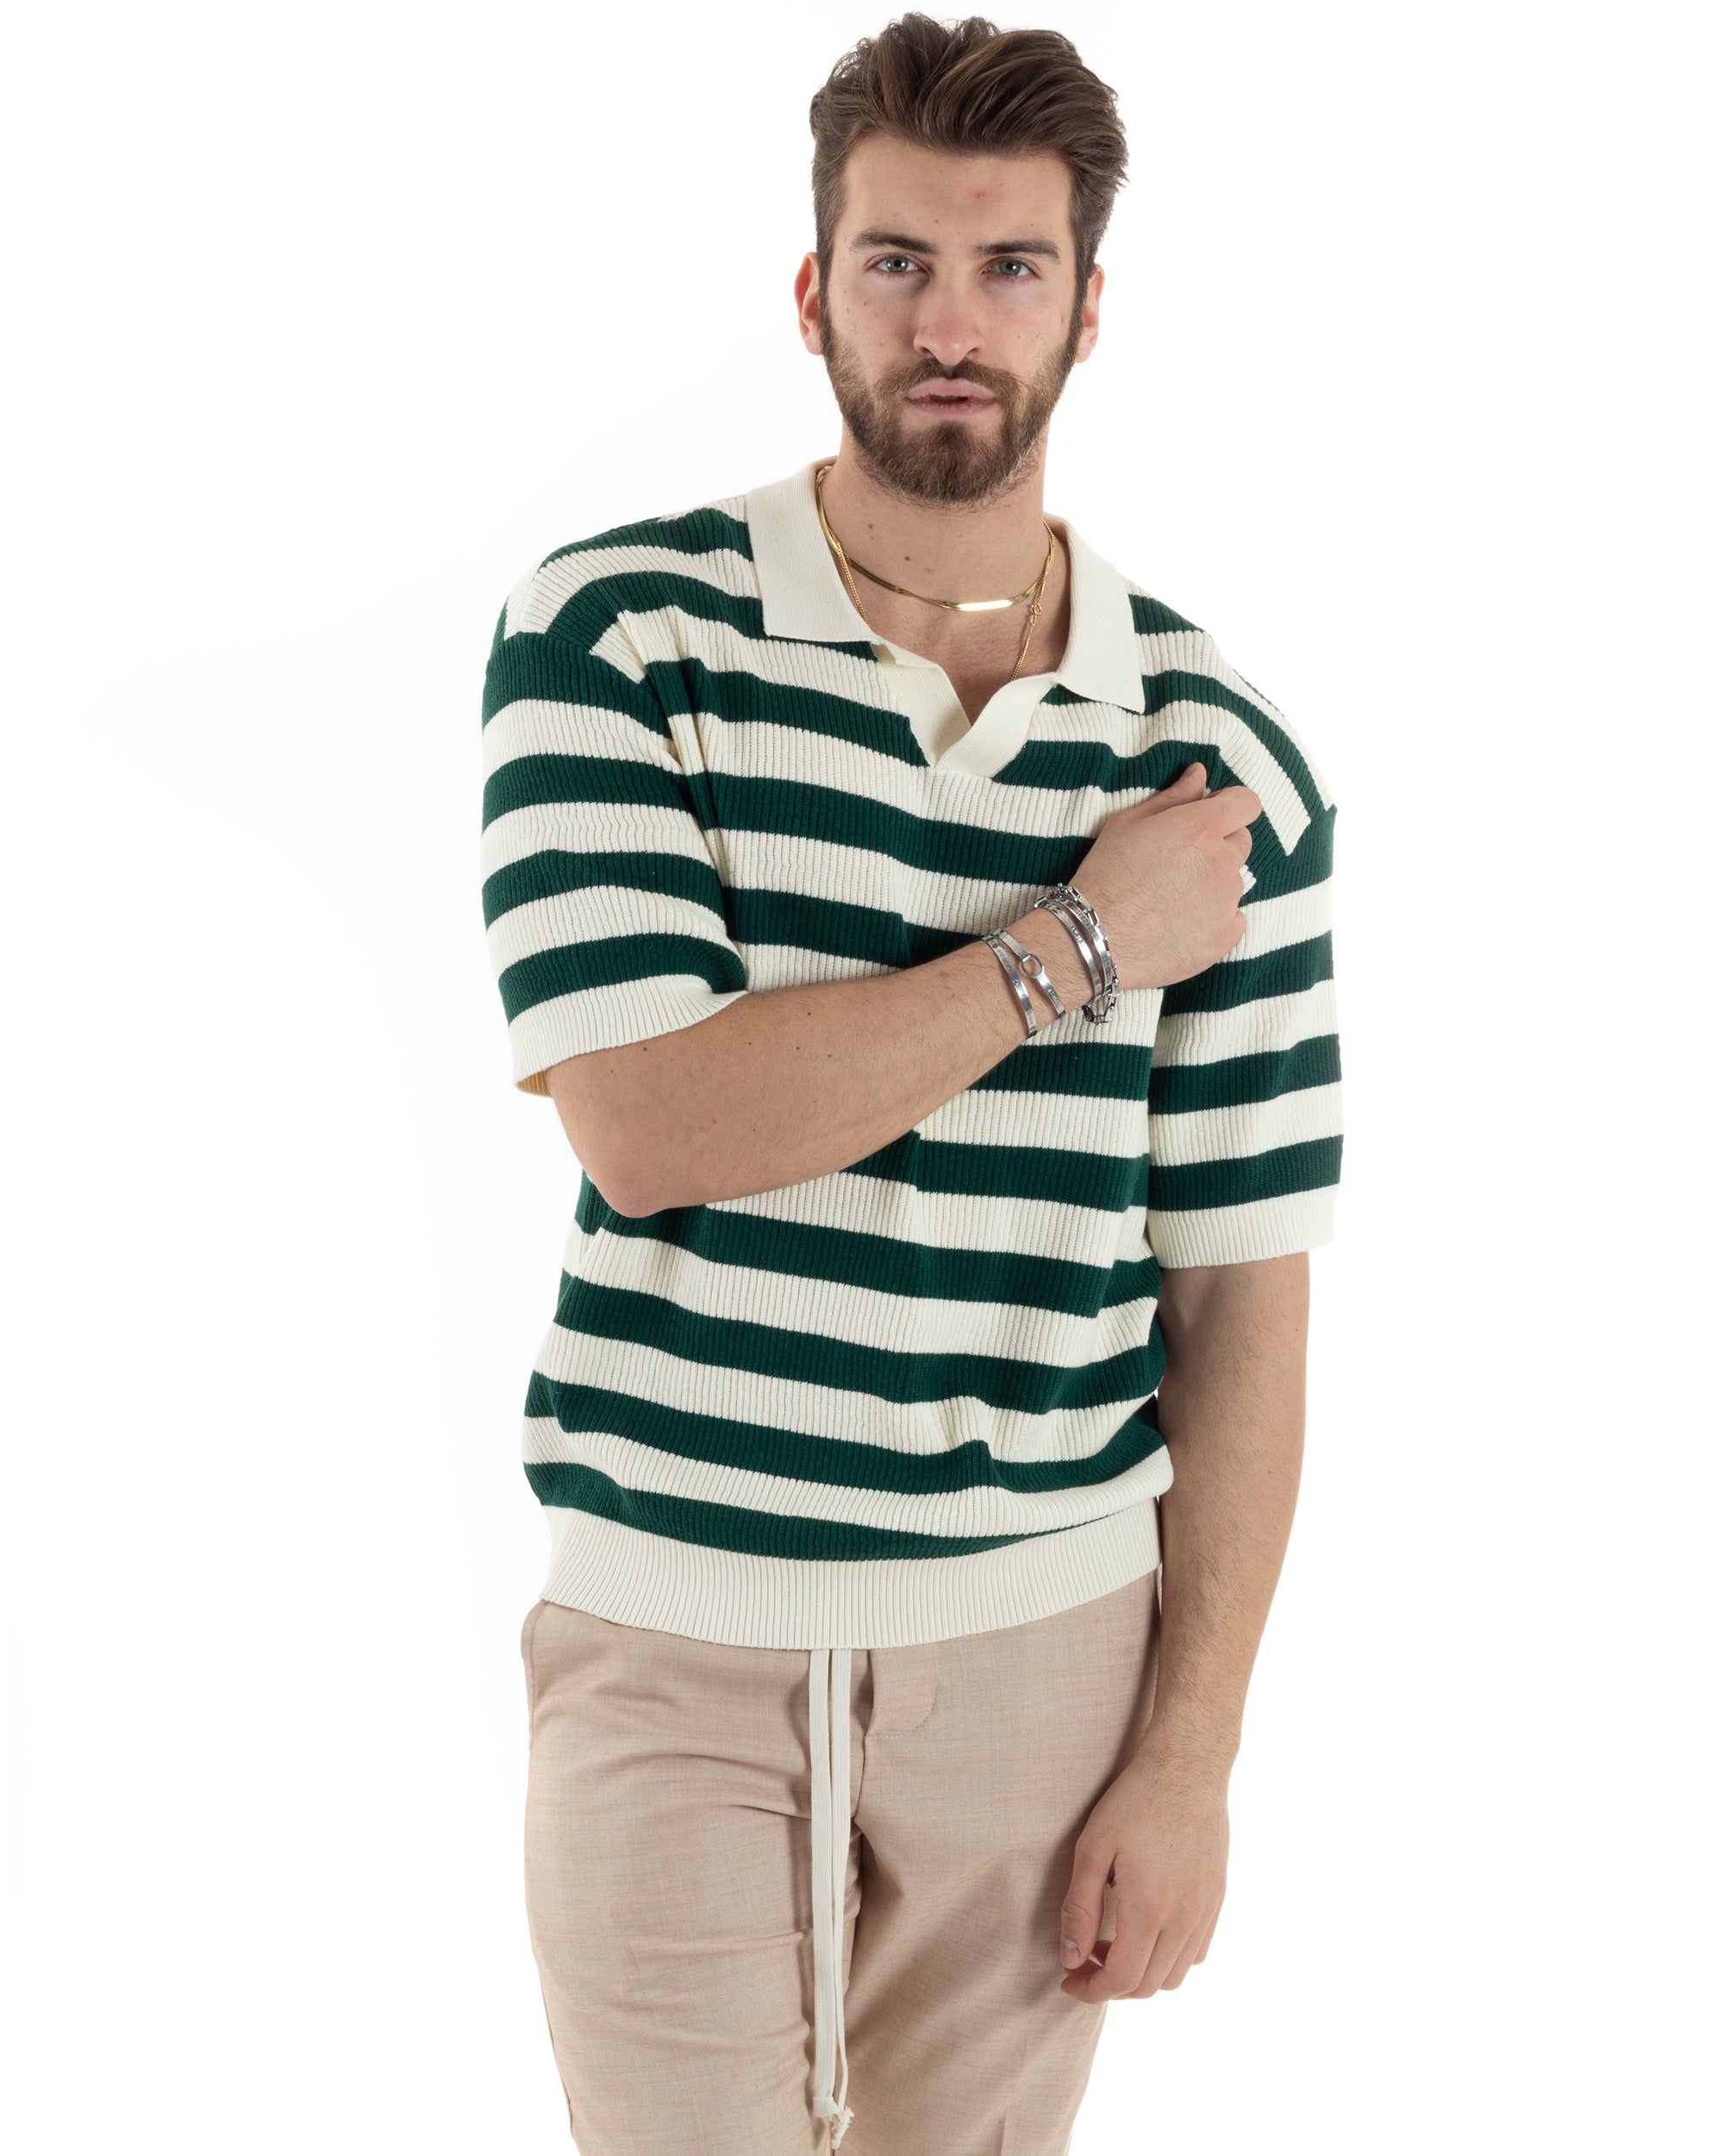 Men's T-Shirt Short Sleeve Solid Color Striped Thread Round Neck Powder GIOSAL-TS2891A